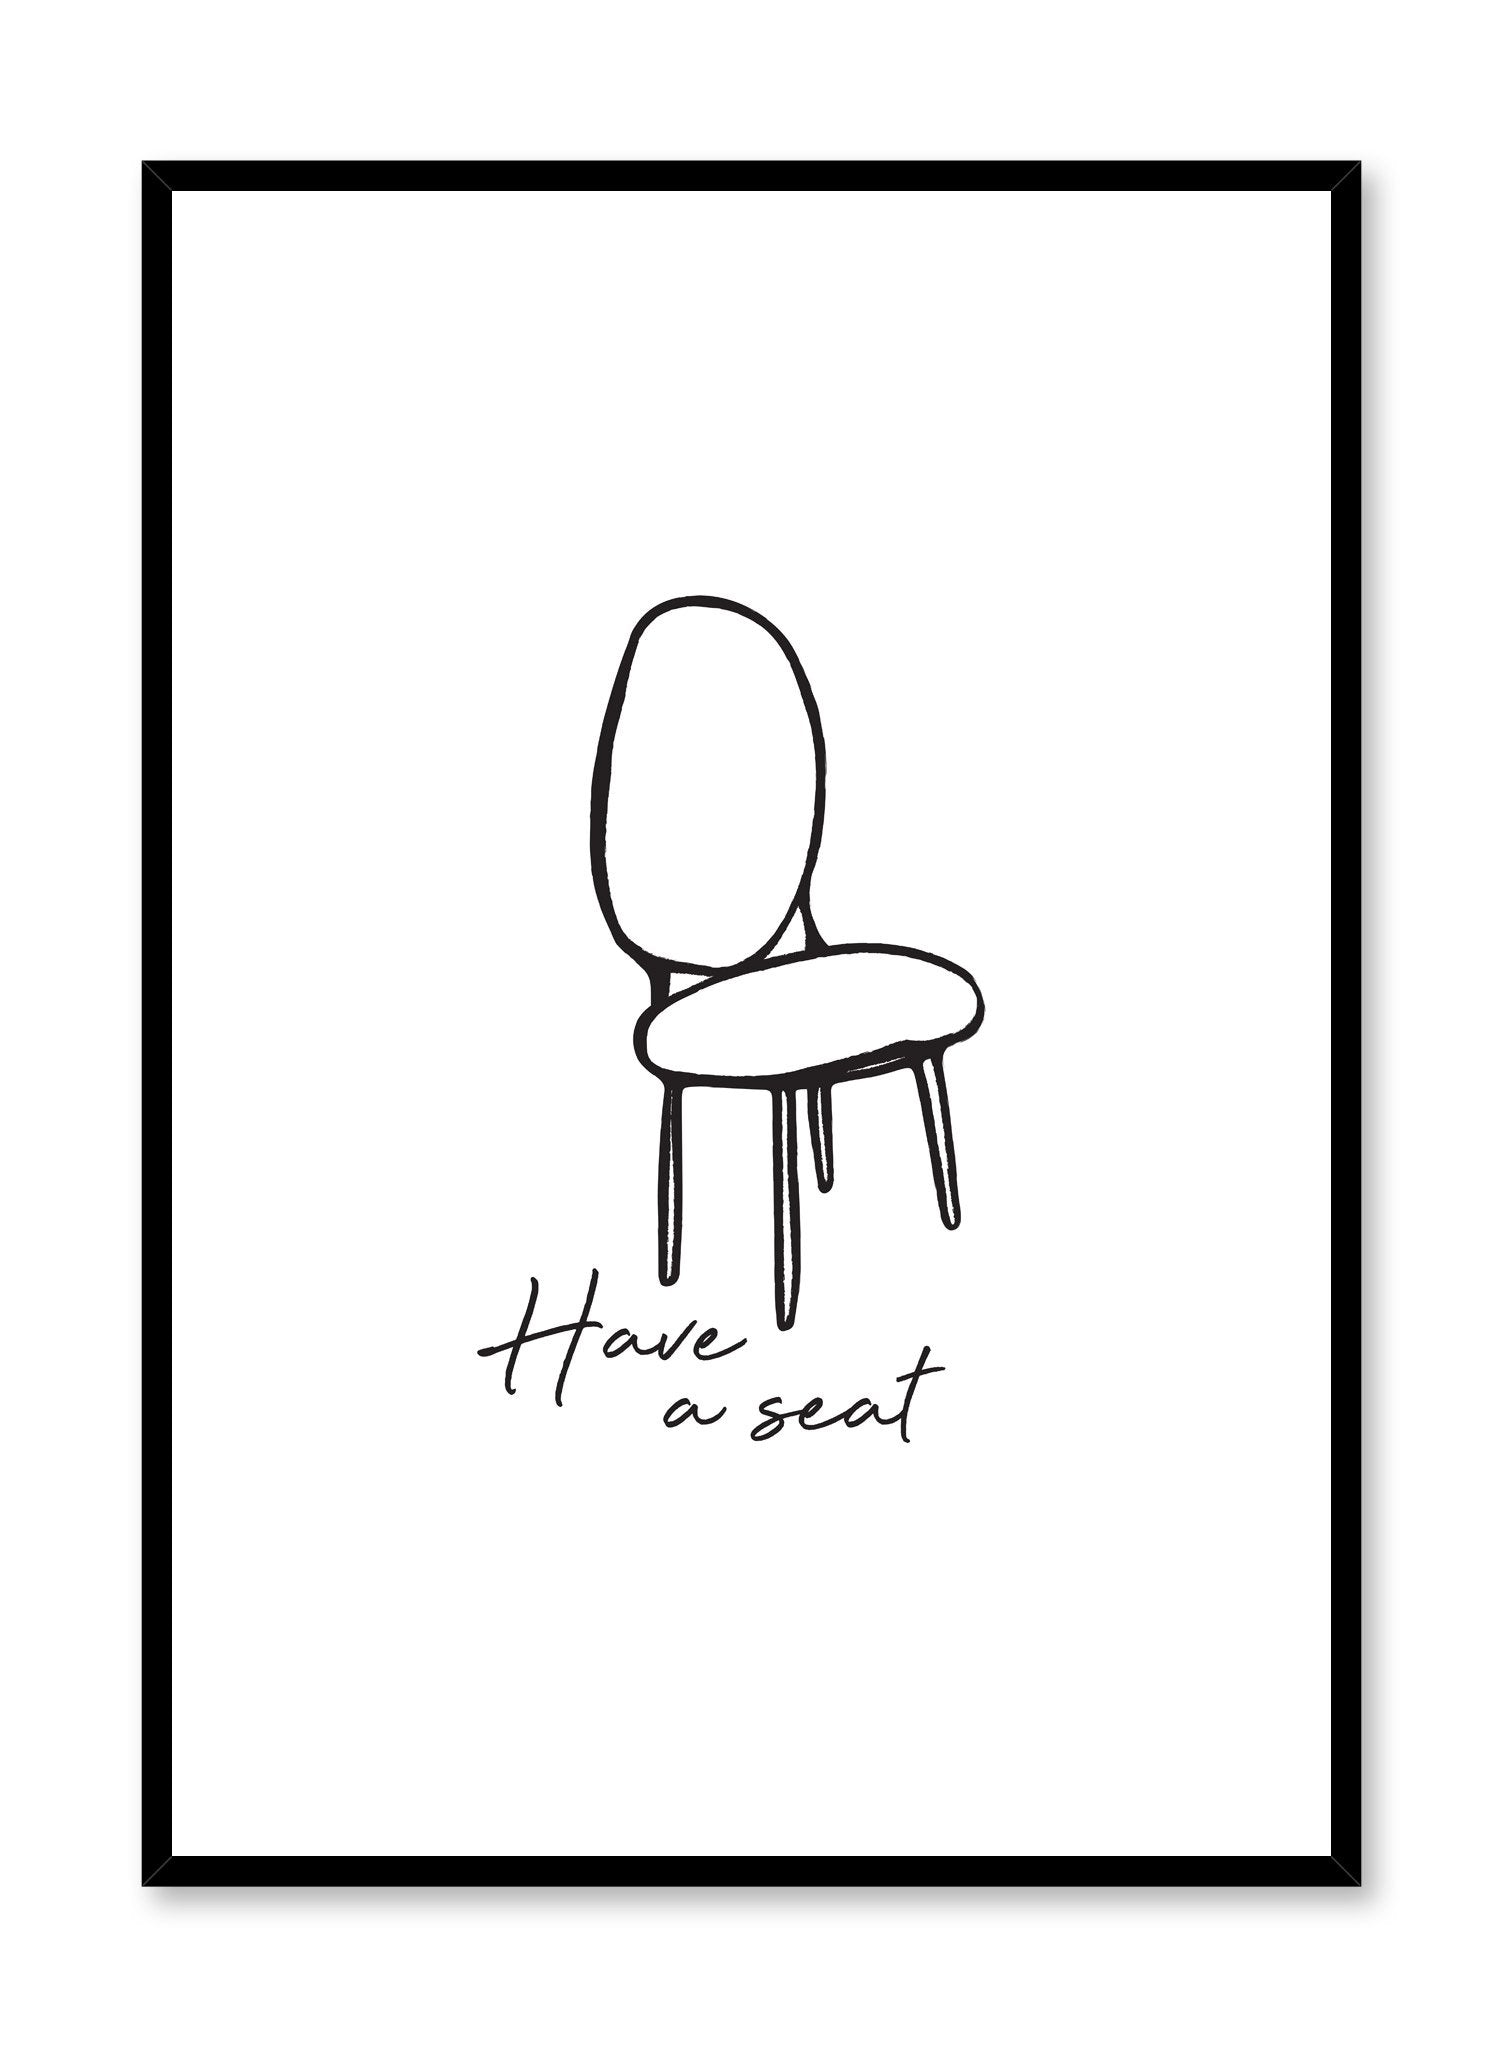 Minimalist poster by Opposite Wall with Have A Seat illustration